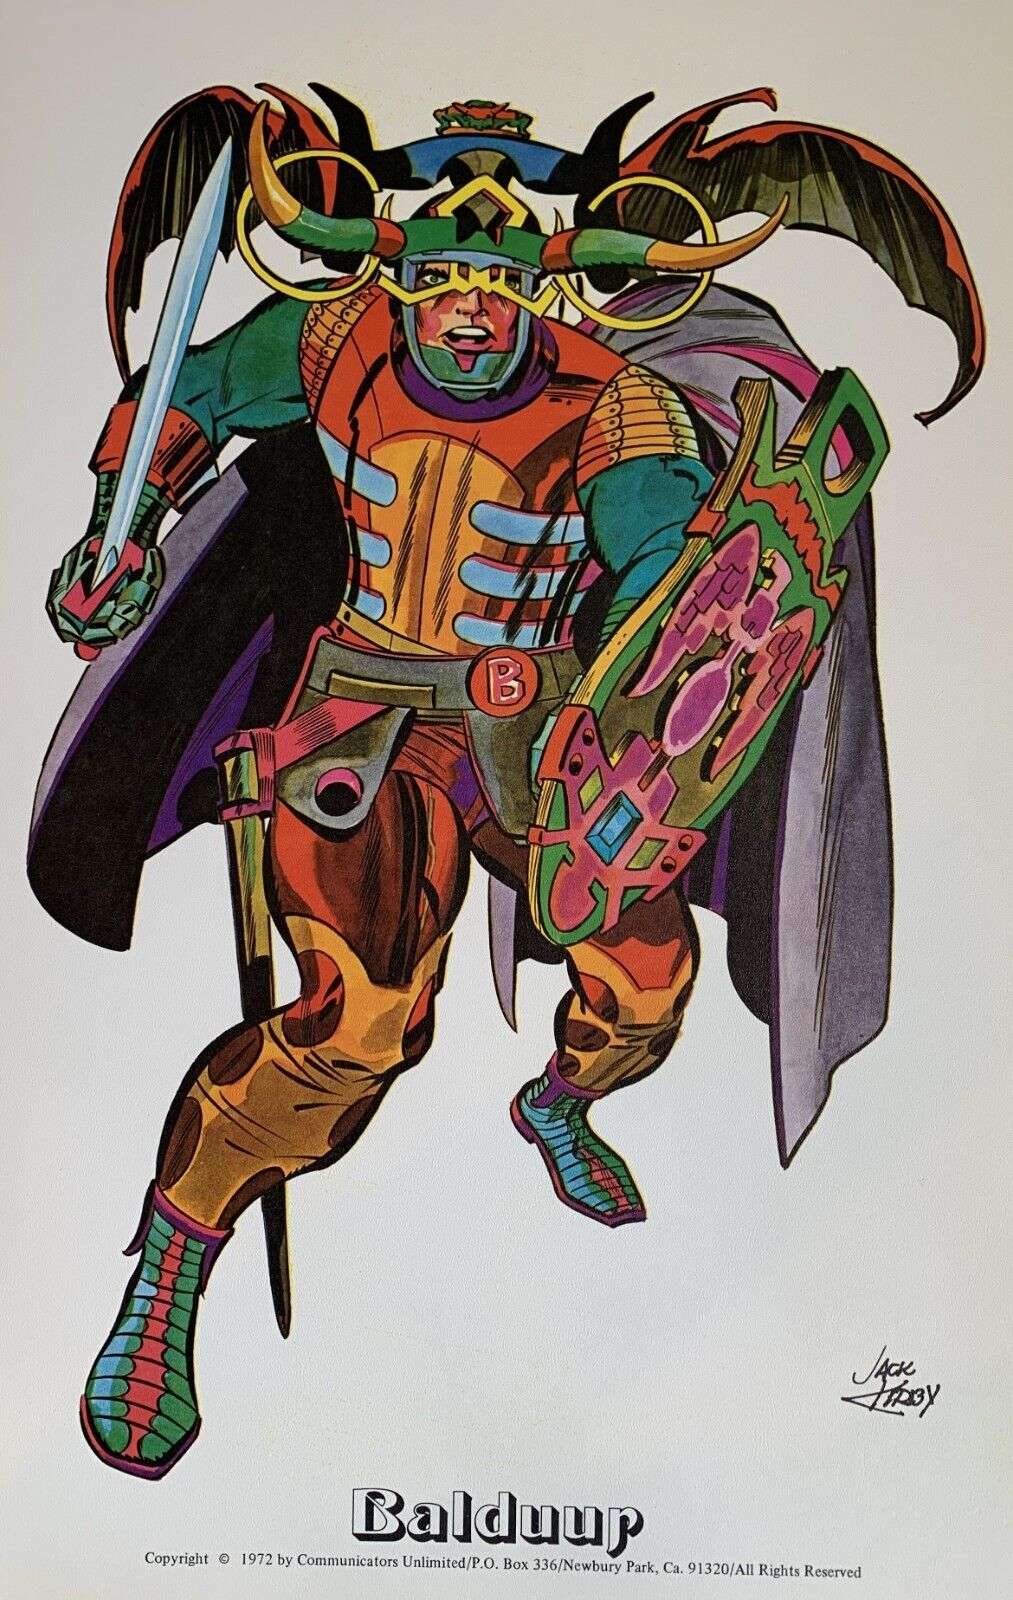 Jack Kirby rare 1972 print:  Balduur from Jeremy Kirby's personal collection